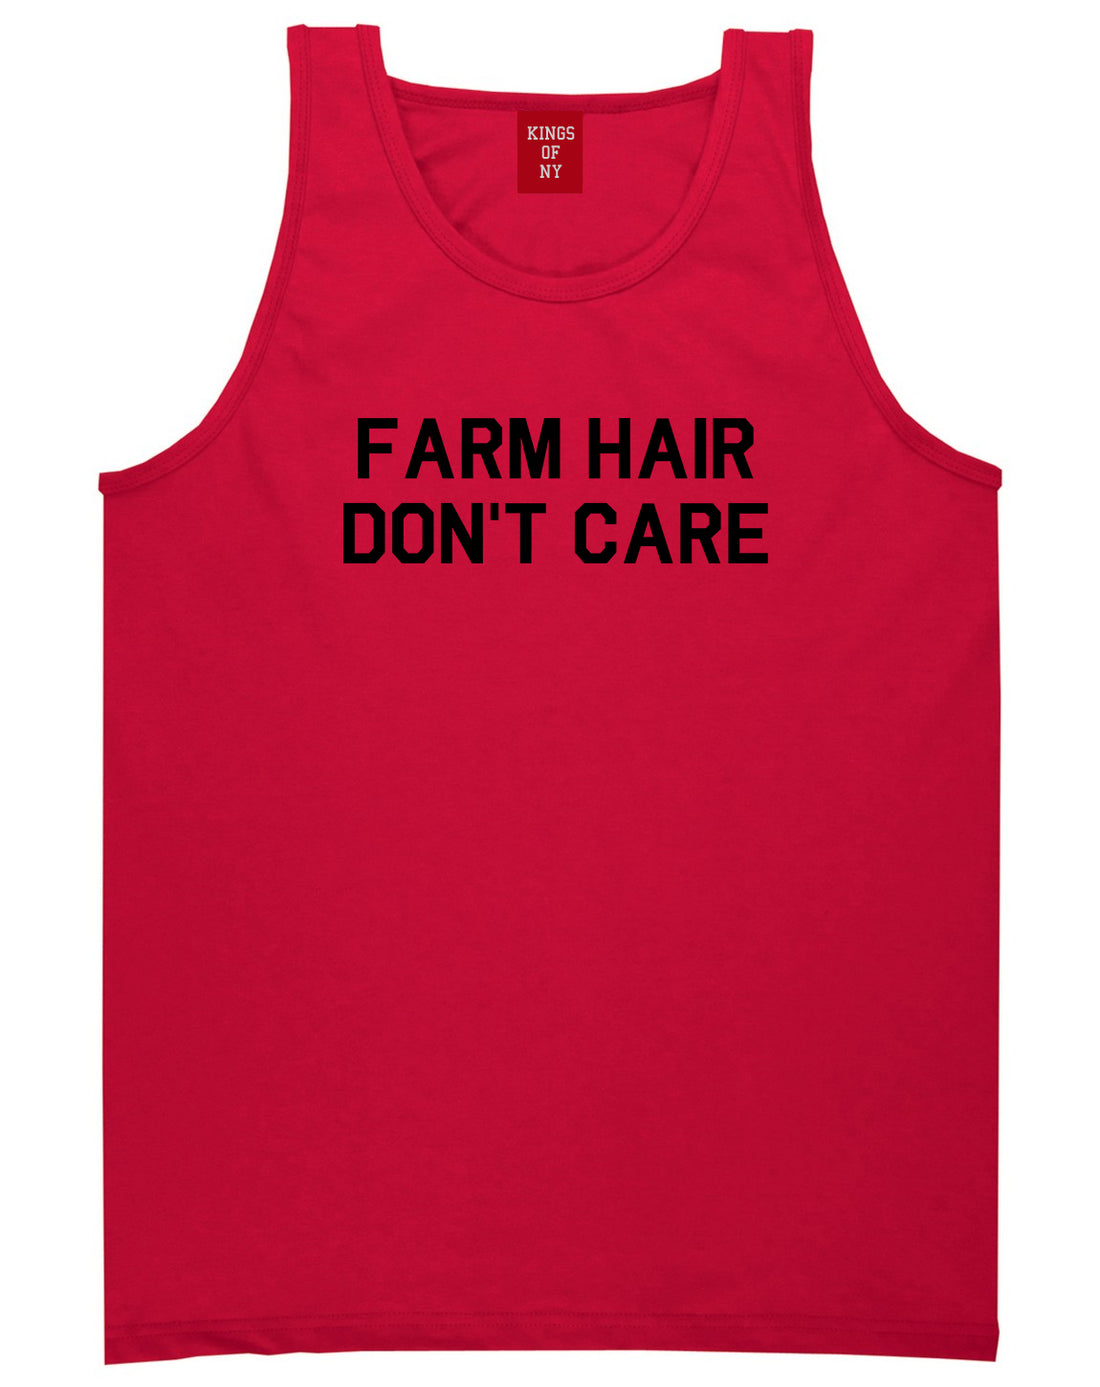 Farm Hair Dont Care Mens Red Tank Top Shirt by KINGS OF NY